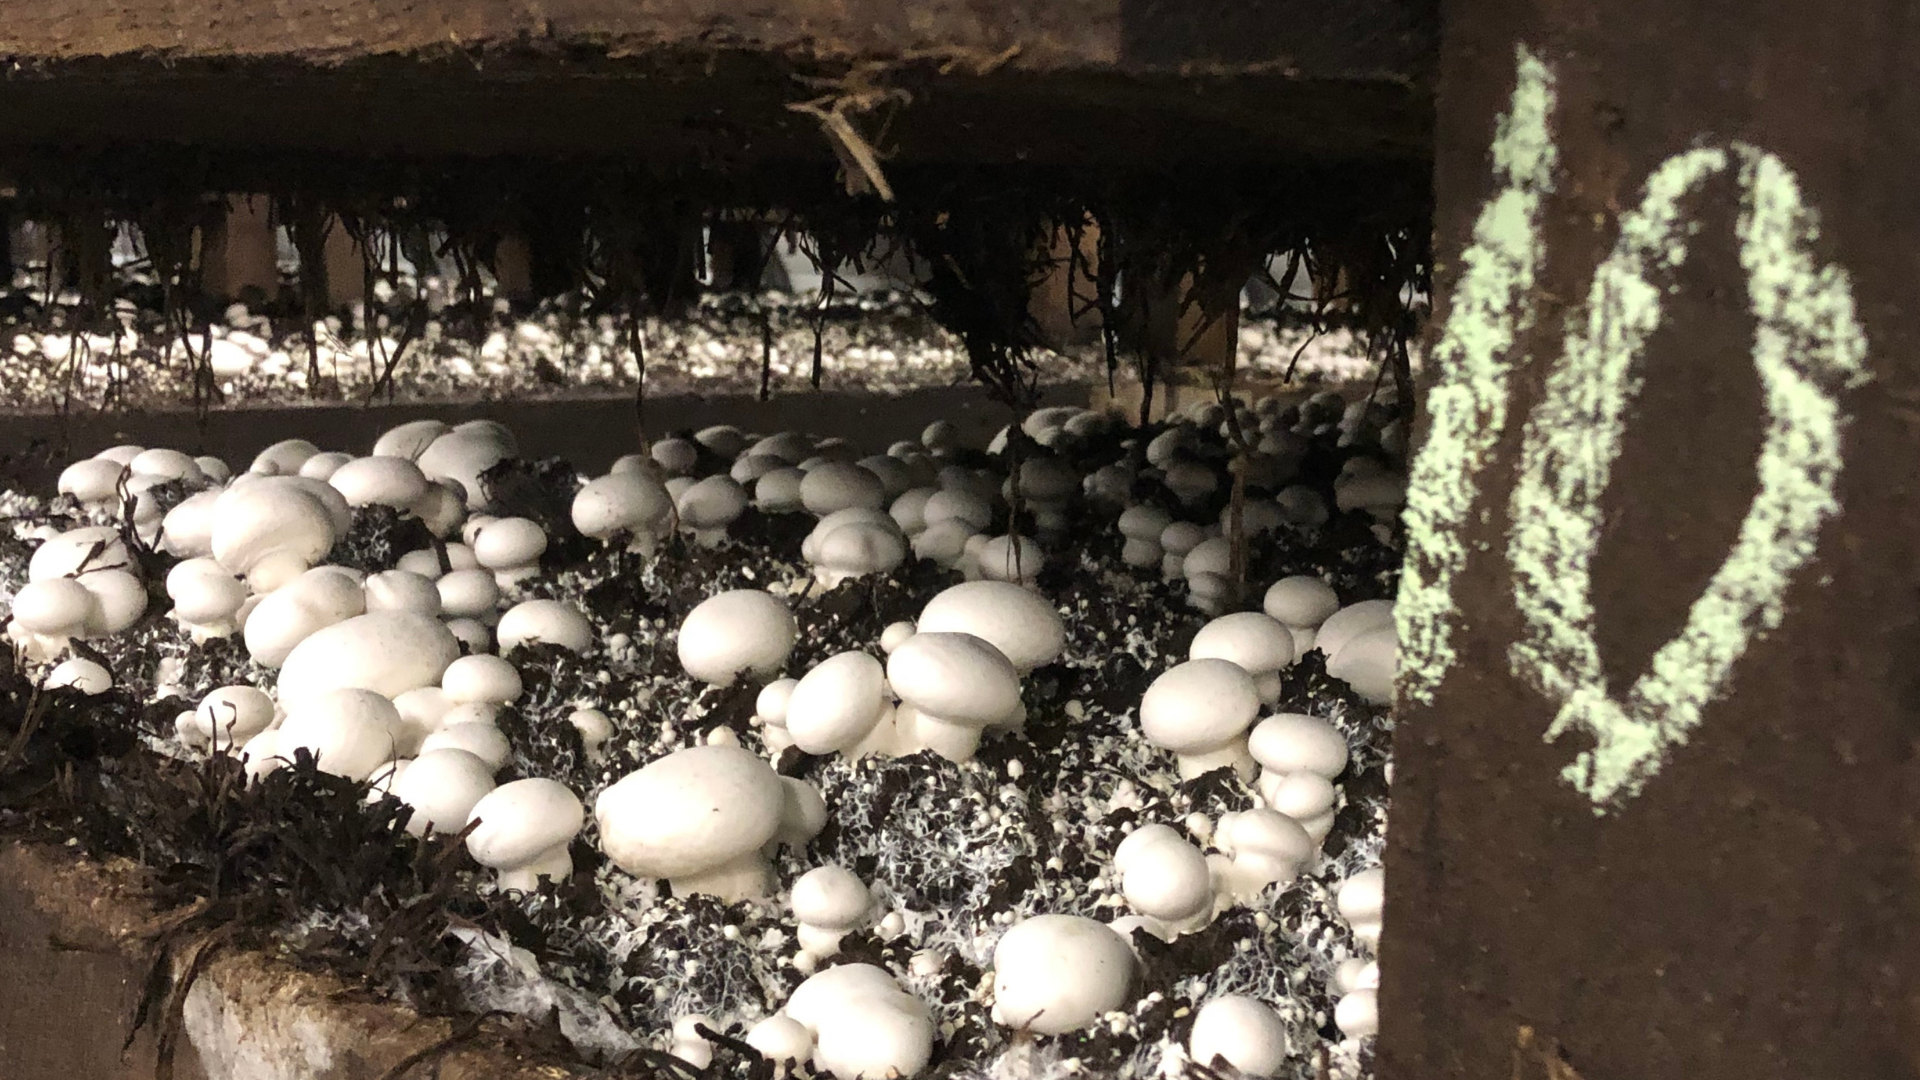 A Mushroom Farm Visit is a Totally Different Farm Experience - JP loves